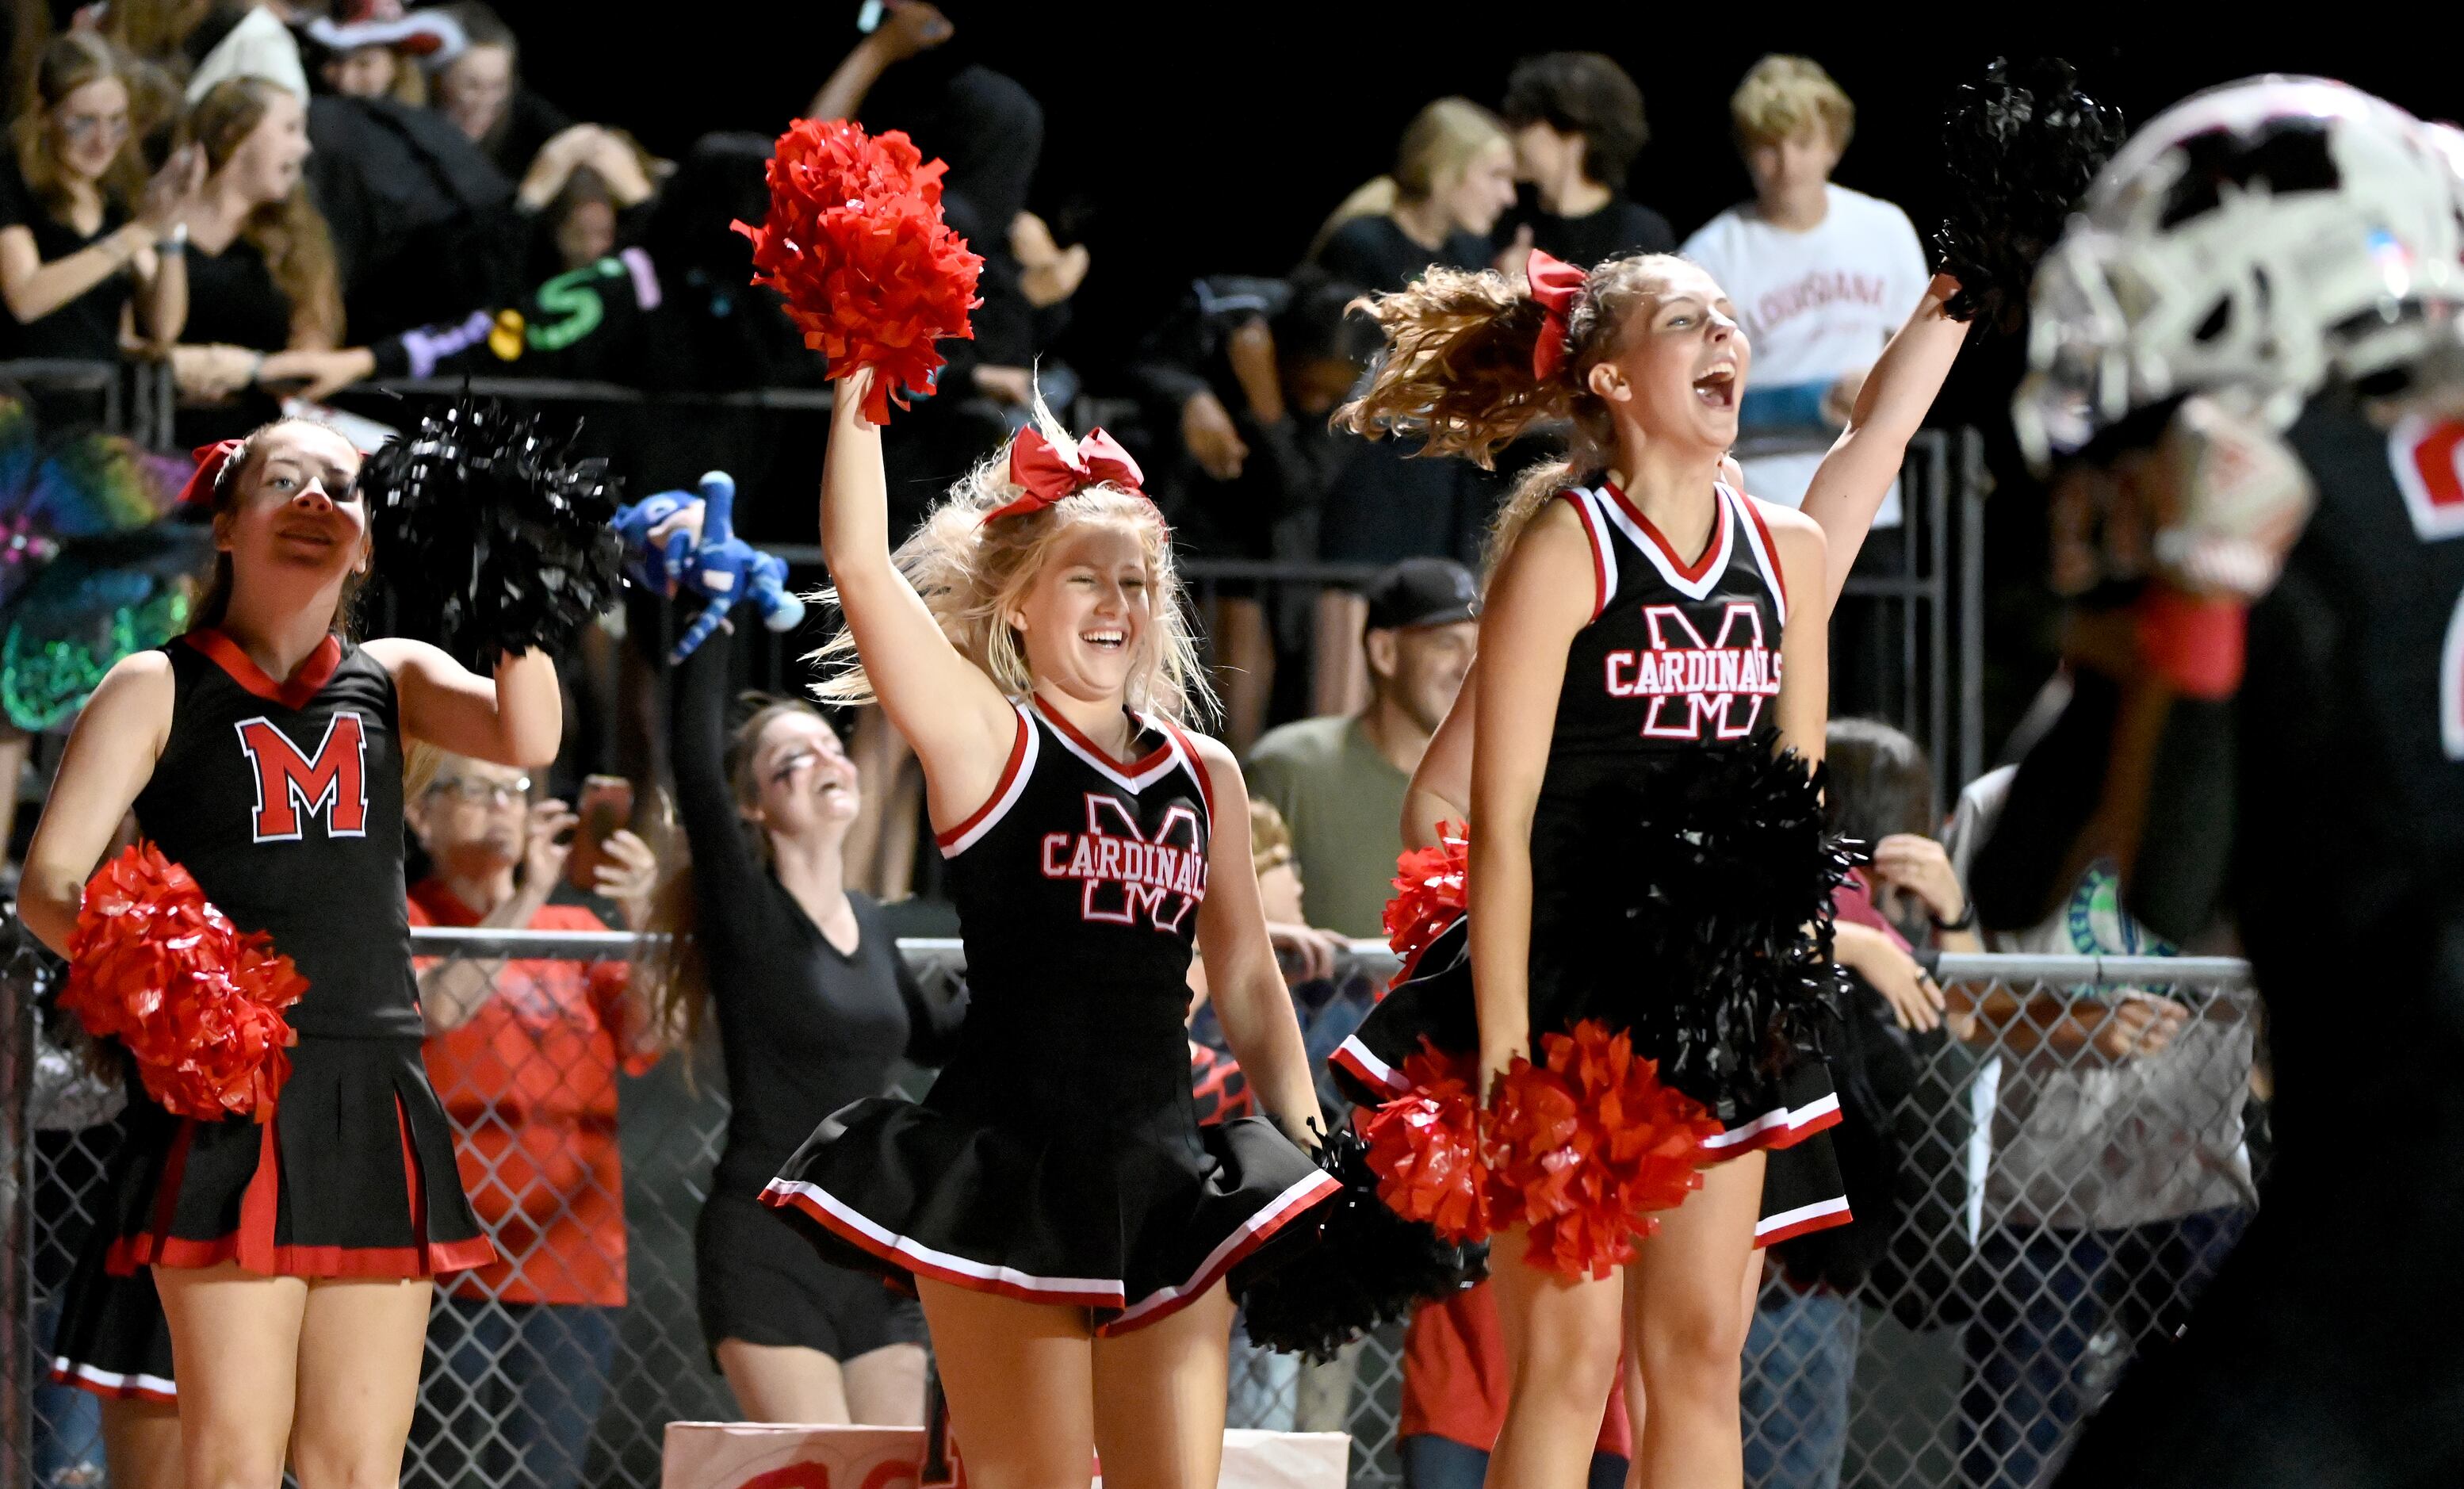 Melissa cheerleaders celebrate after a touchdown in the first half of a high school football...